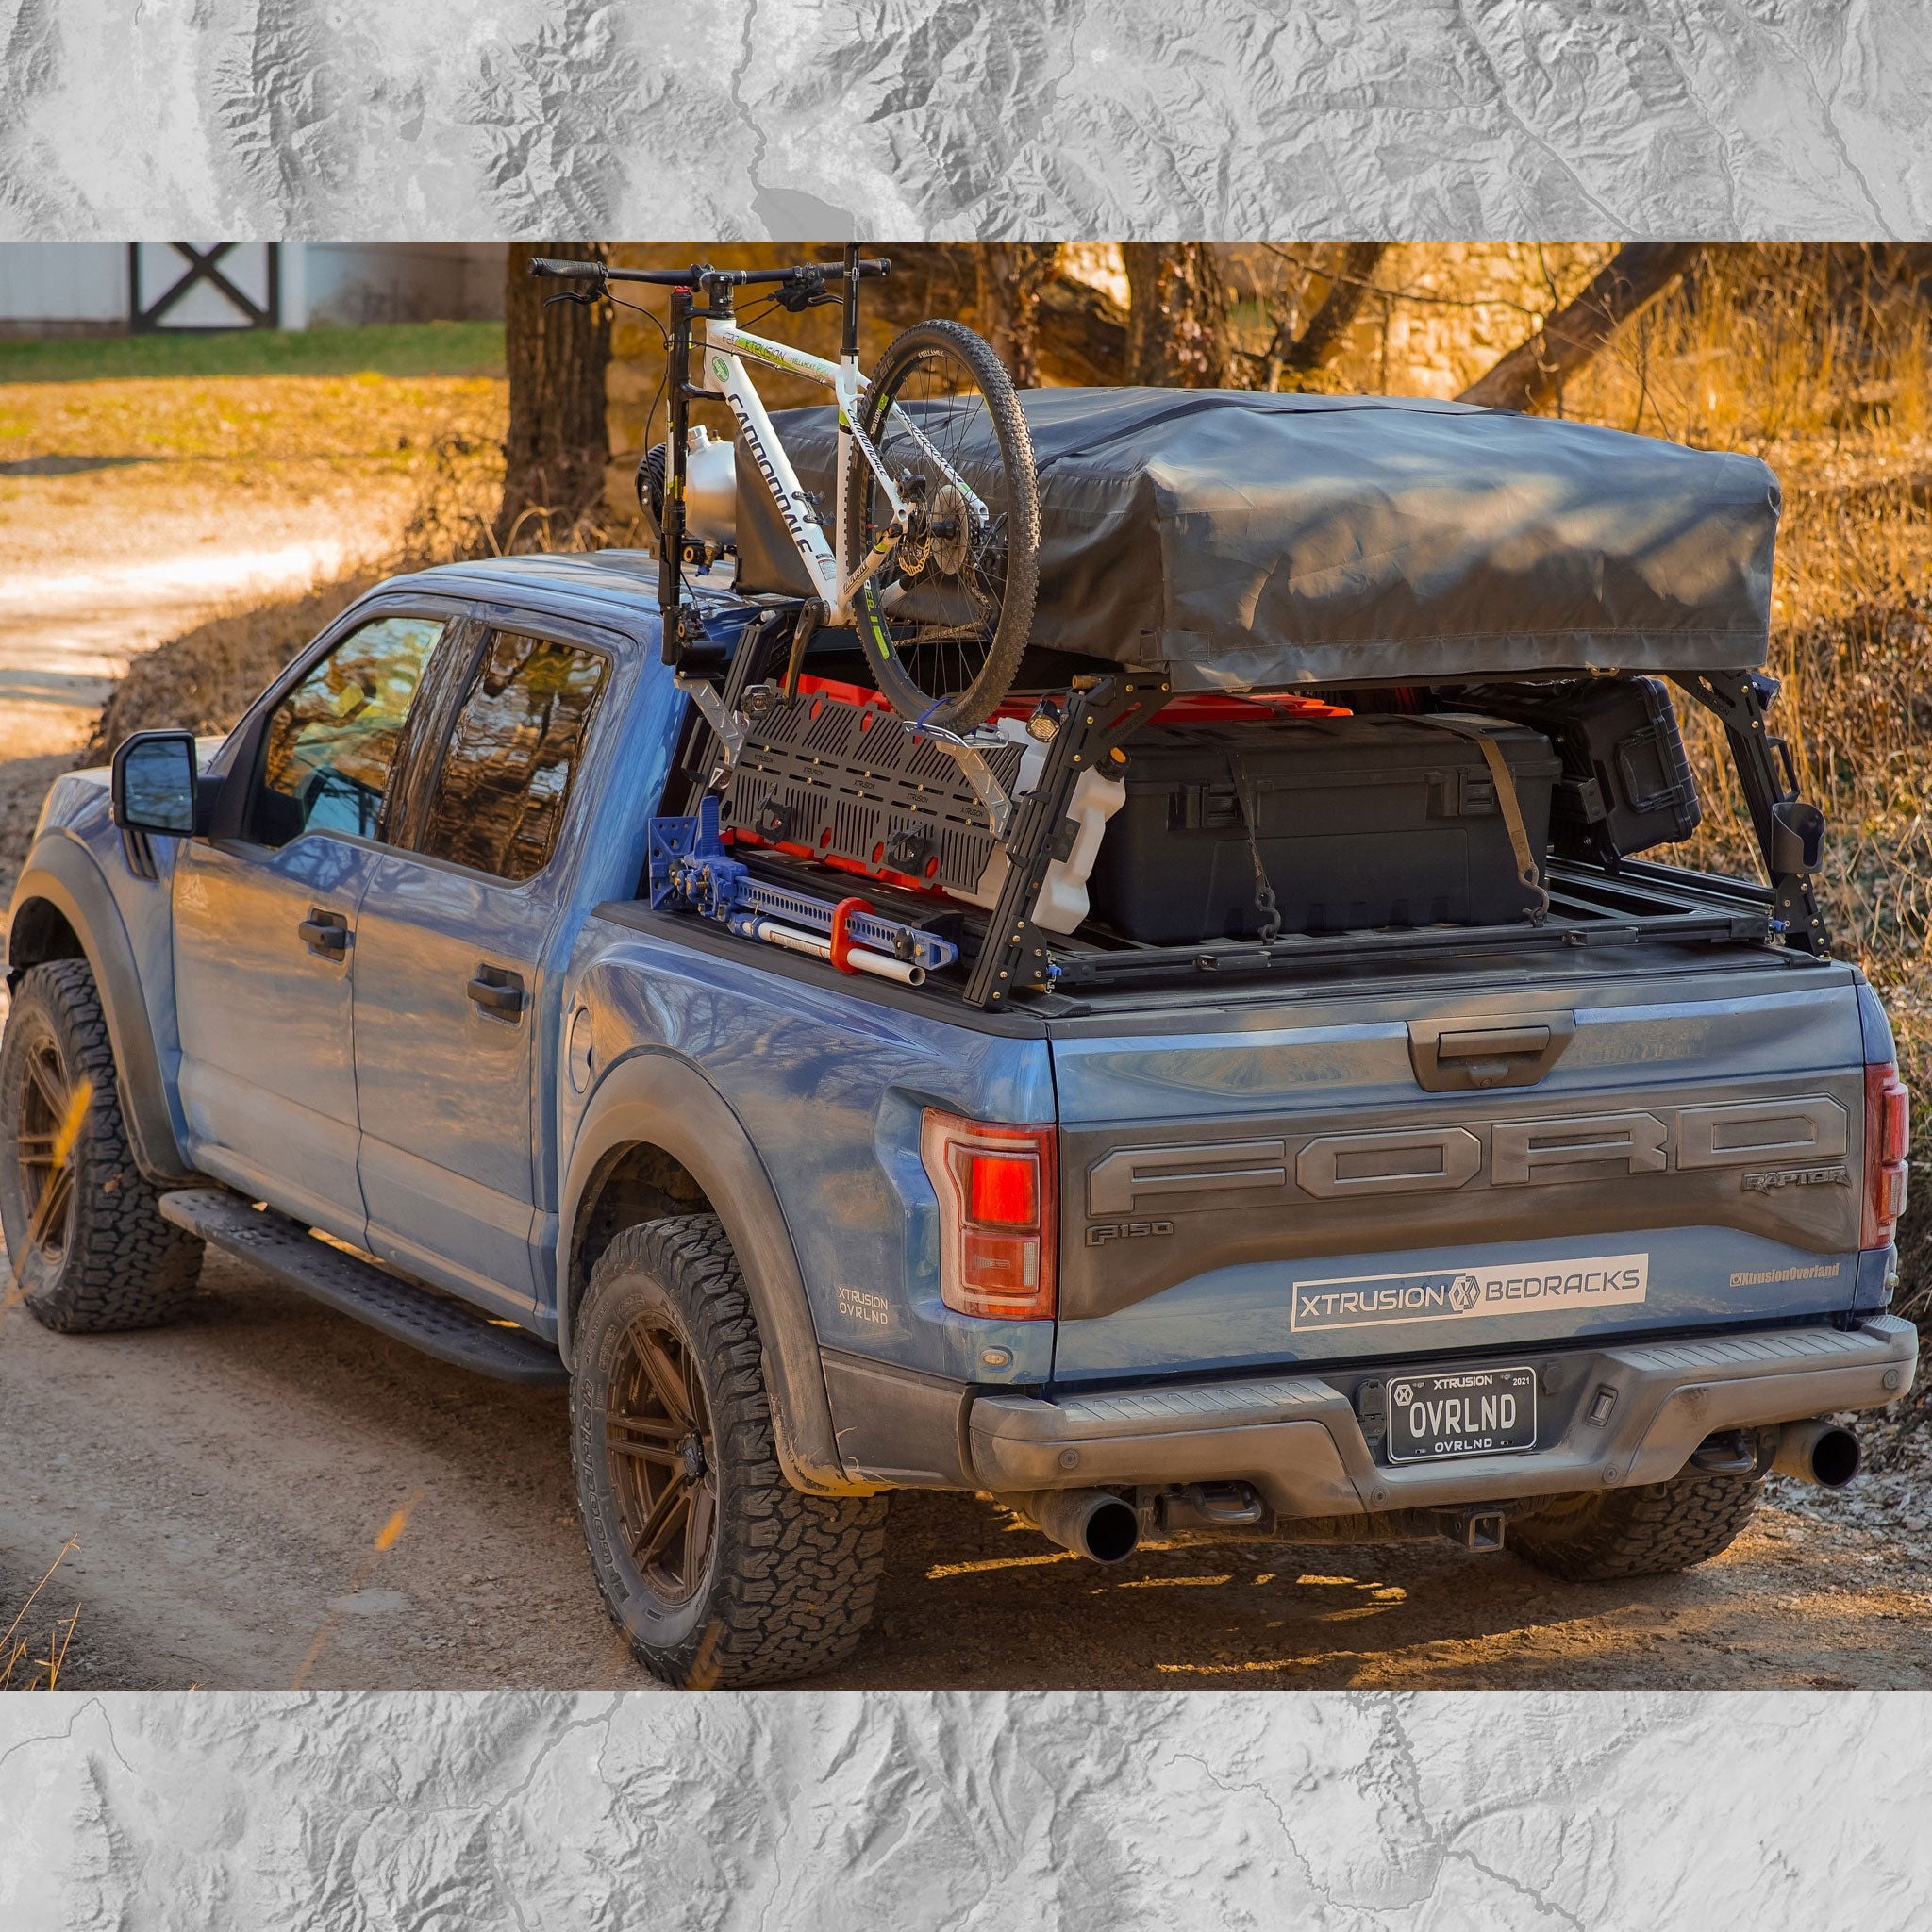 Ford Raptor Extrusion Overland Bed Rack with Hi-lift mounted, Rotopax’s mounted, Molle panels, Mountain Bike, Roof top tent, and Pressurized solar water tank.